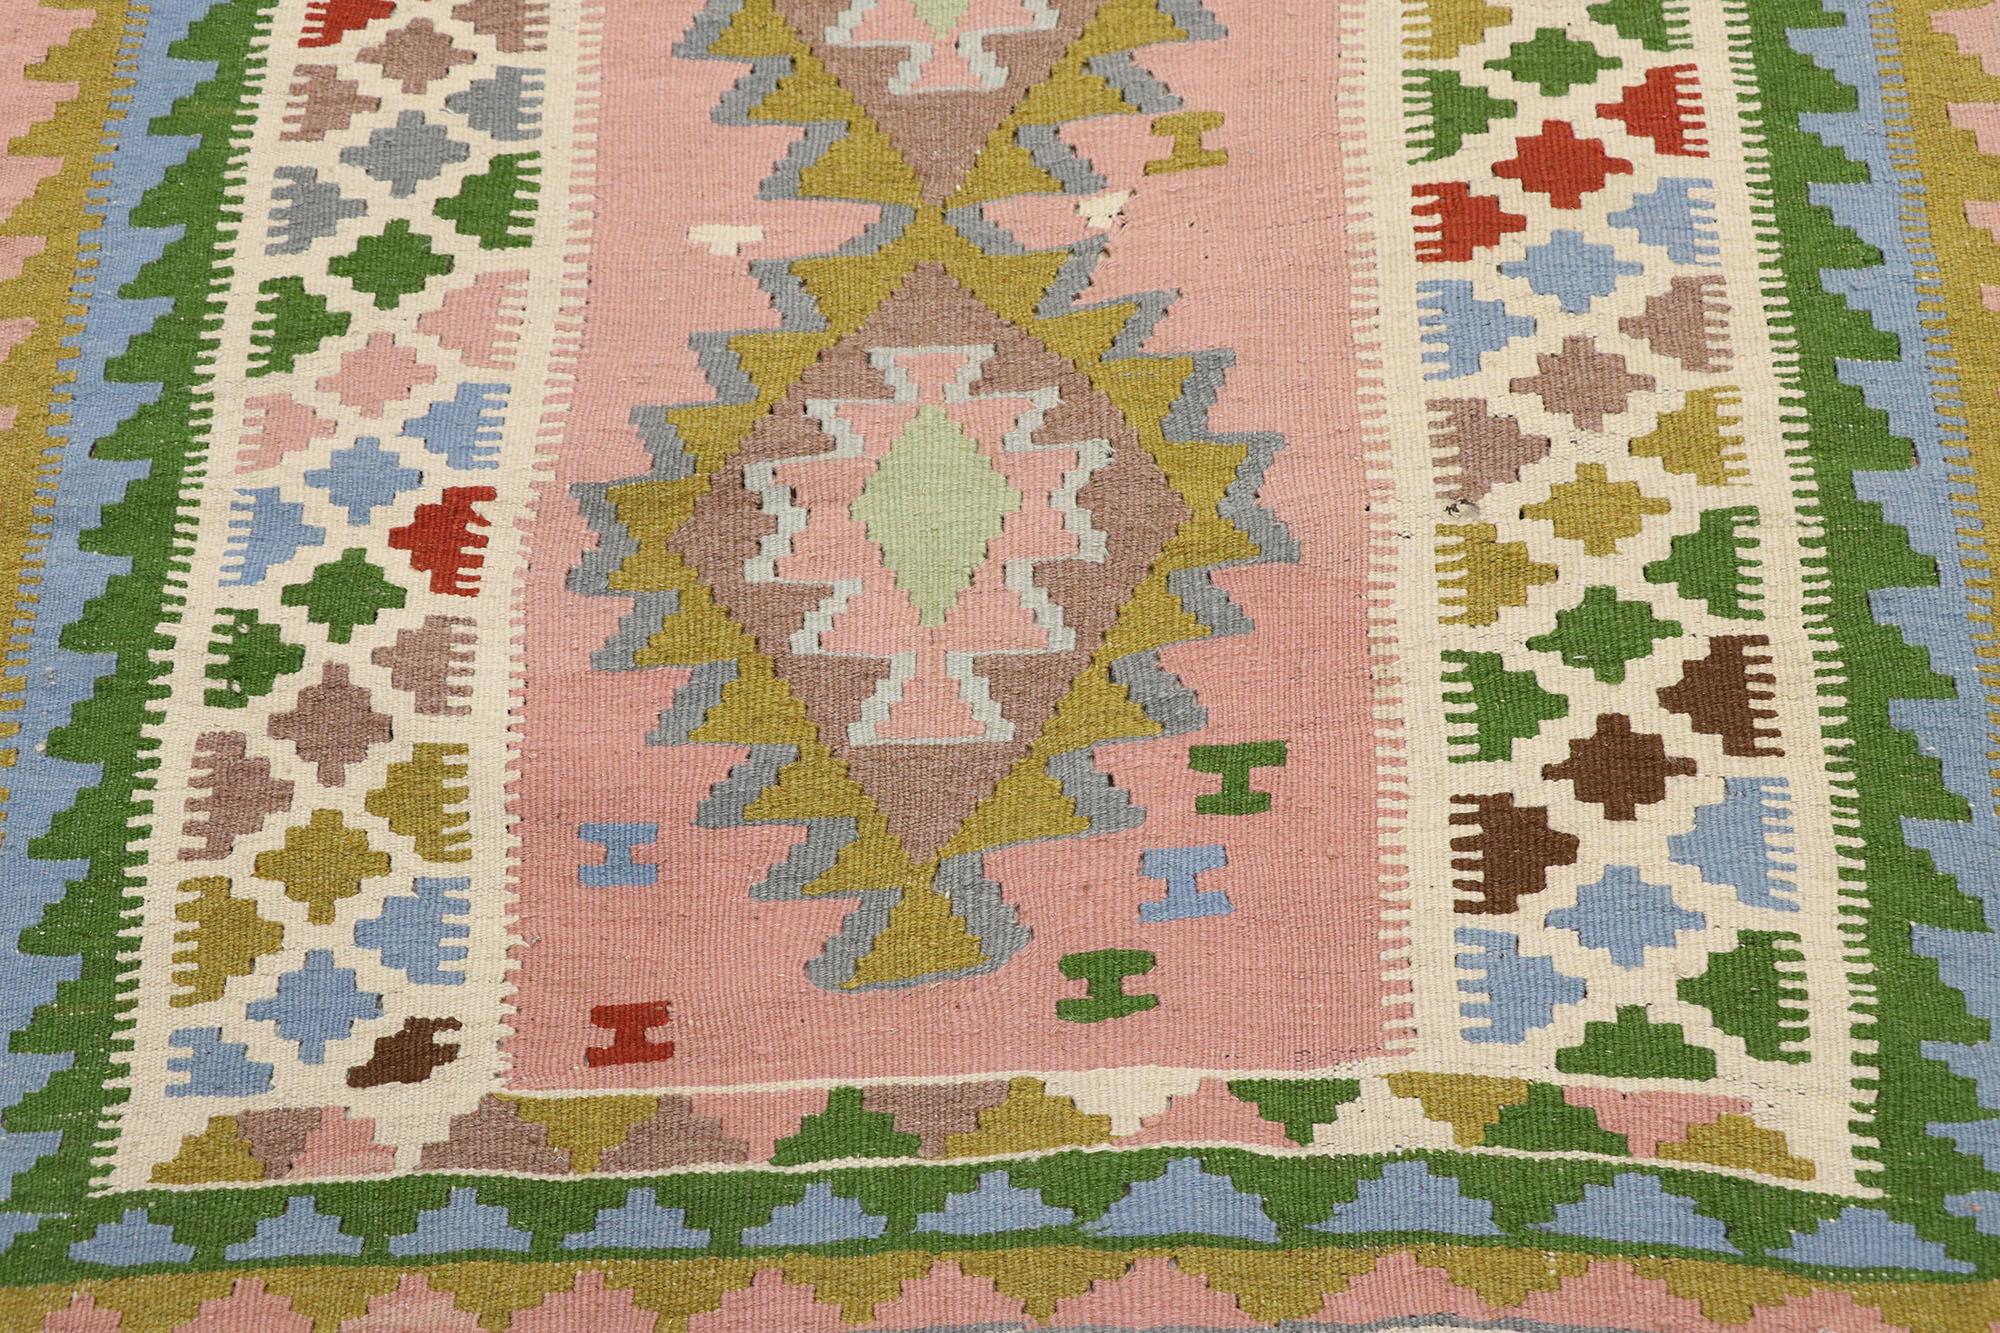 Vintage Persian Shiraz Kilim Rug, Luxury Lodge Meets Southwest Boho Style In Good Condition For Sale In Dallas, TX